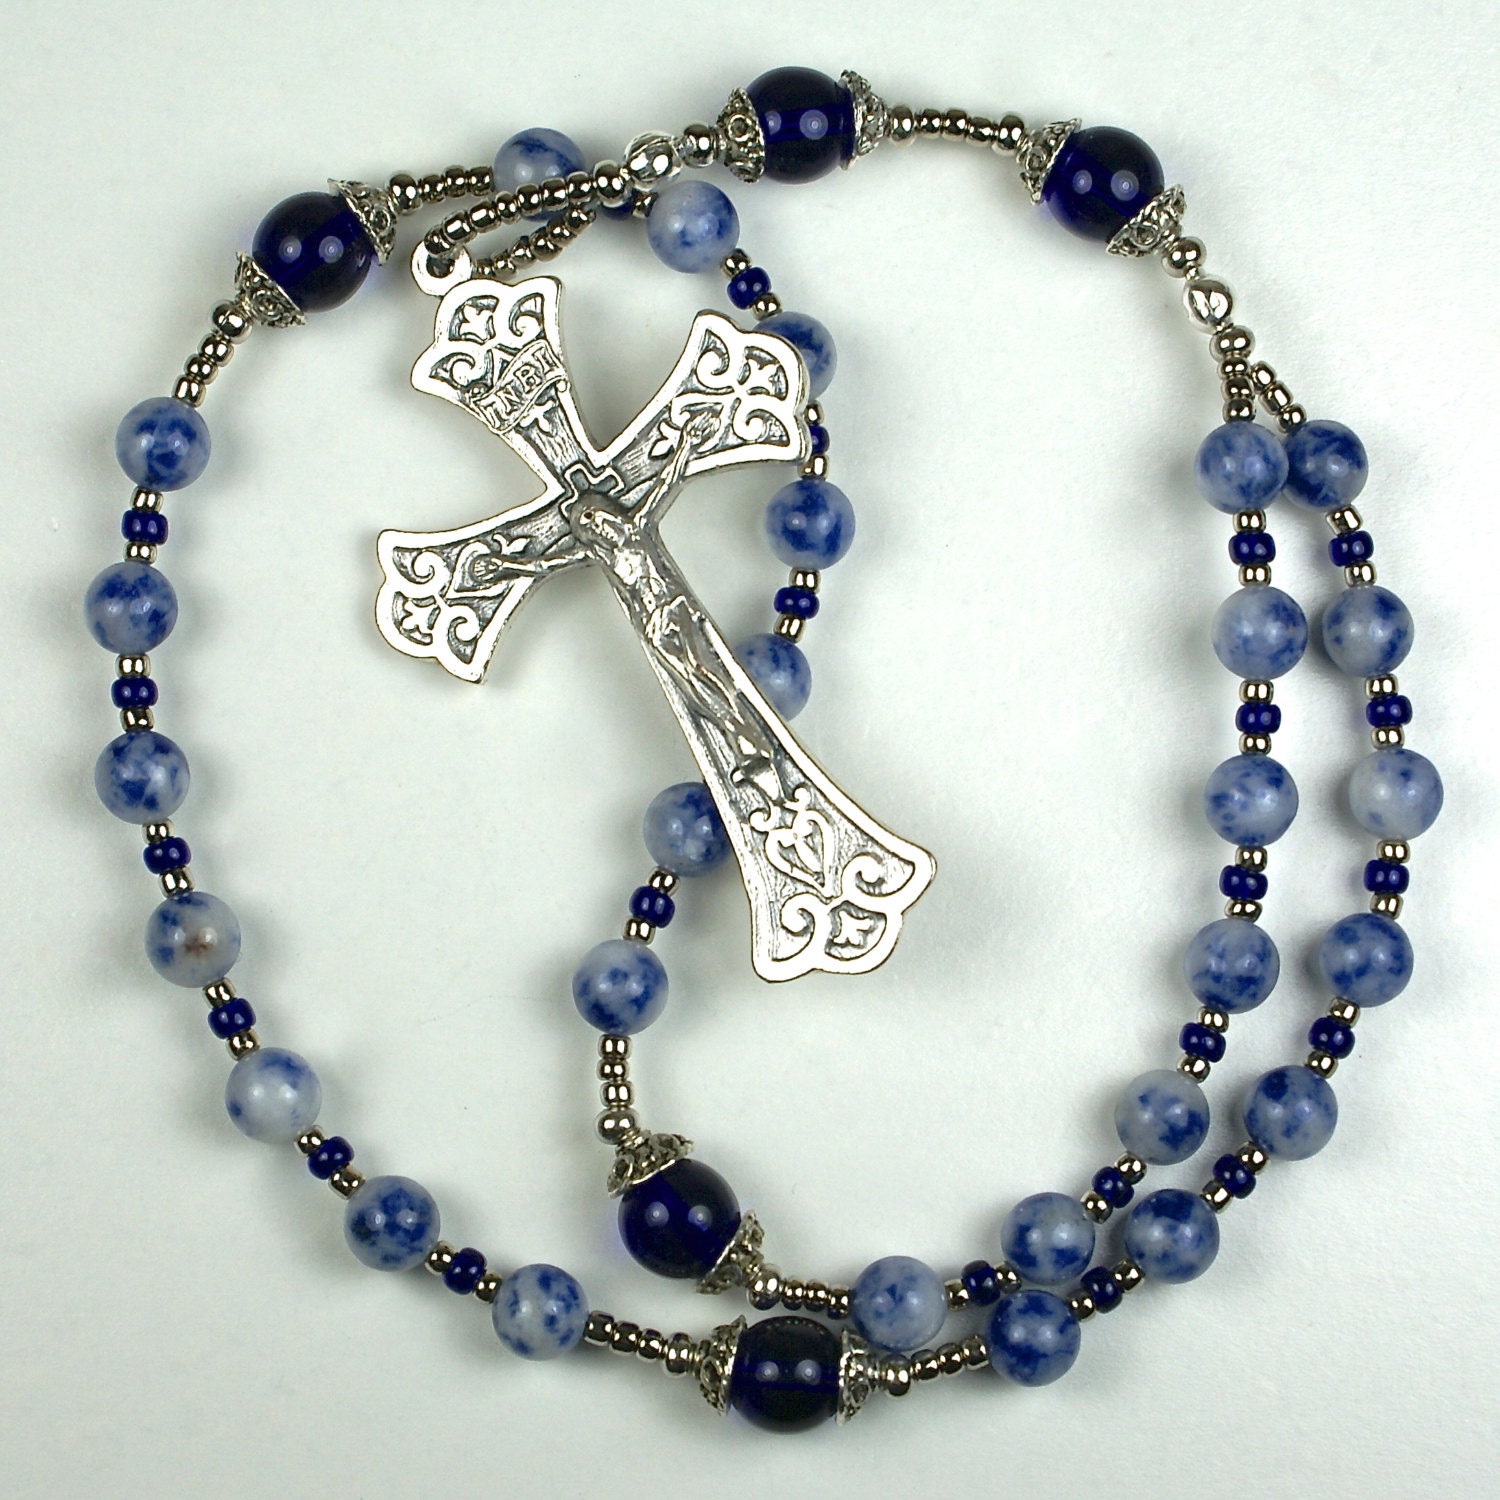 Handmade Anglican Rosary Prayer Beads In Cobalt By Prayerbedes